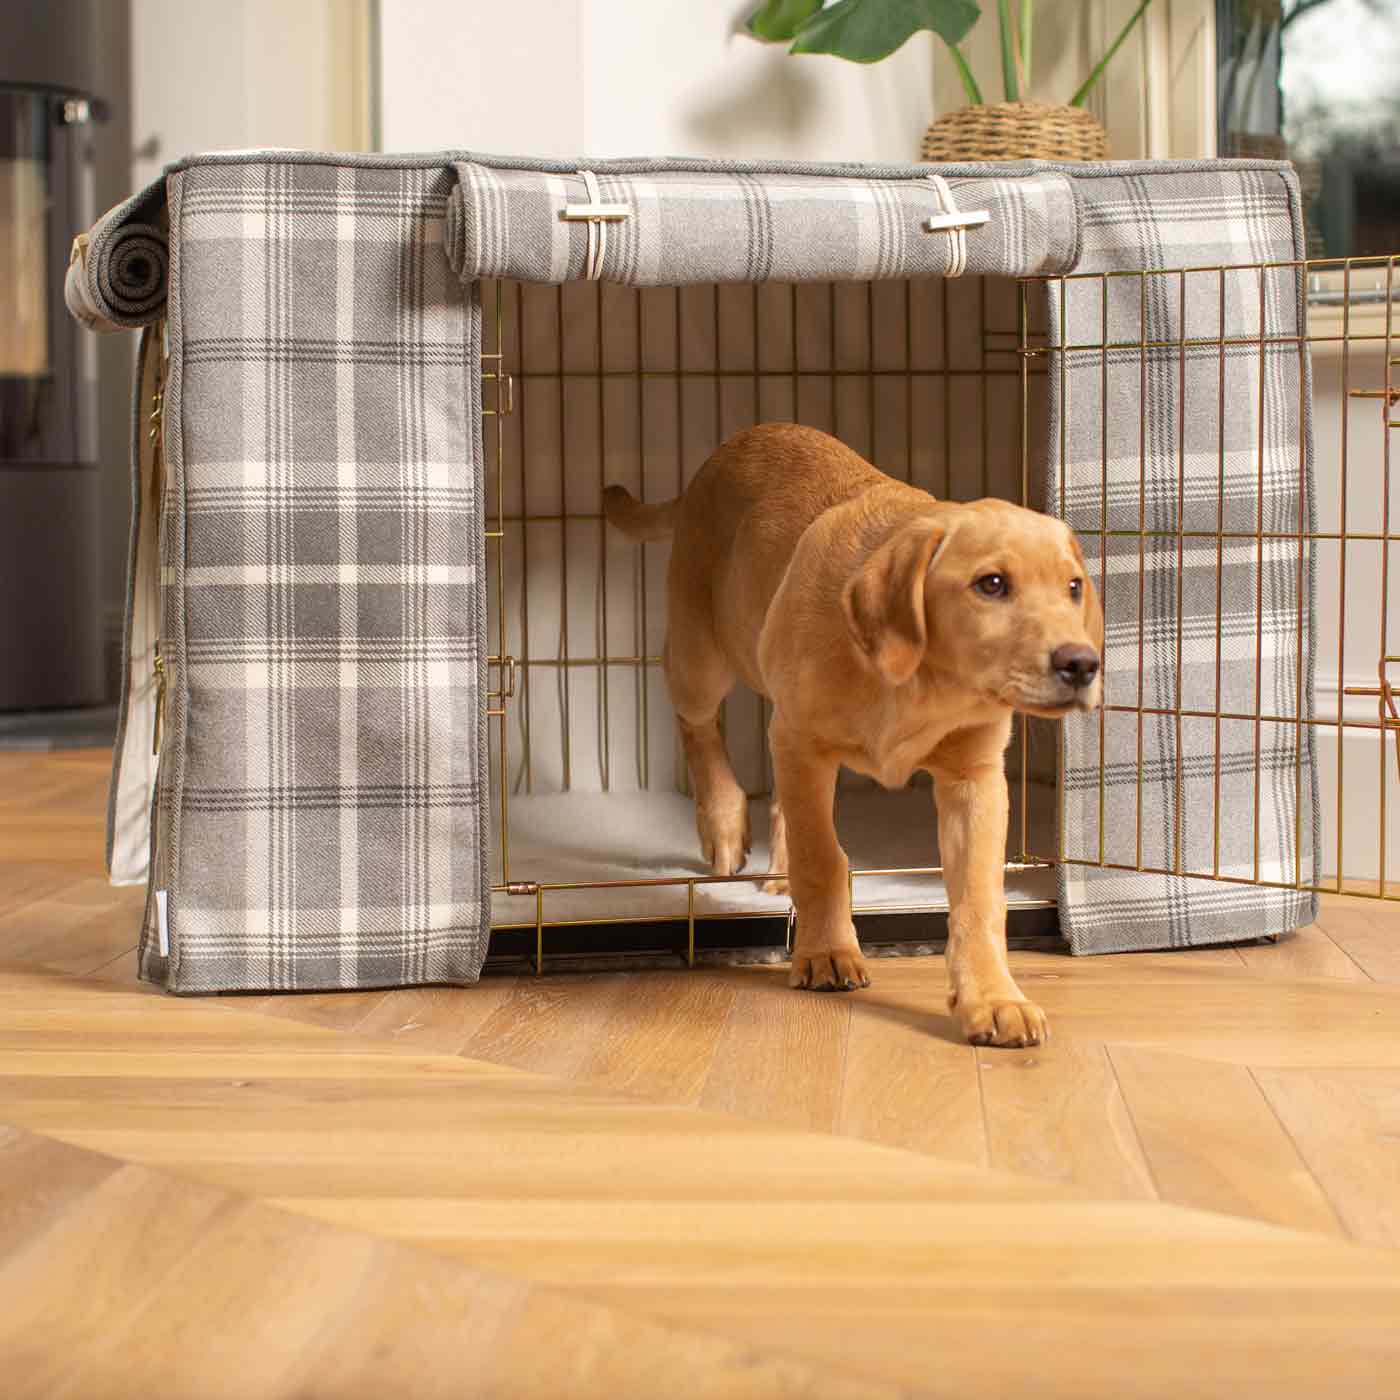 Discover Our Heavy-Duty Dog Crate With Dove Grey Tweed Crate Cover! The Perfect Crate Cover For The Perfect Crate Accessory. Available To Personalise Here at Lords & Labradors 